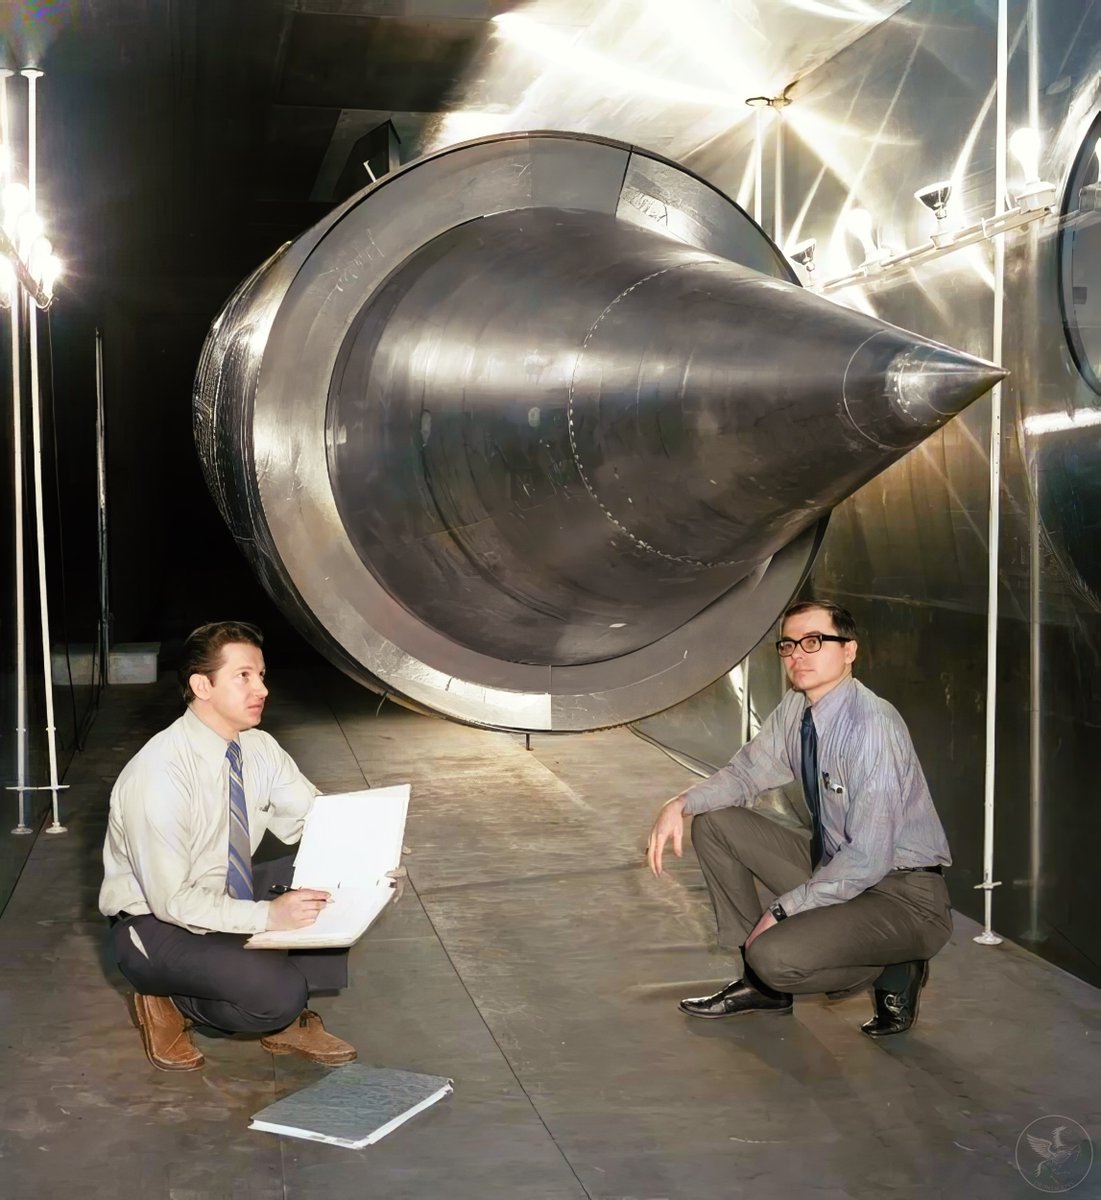 Bobby Sanders and Robert Coltrin check a full-scale YF-12 flight inlet before a February 1972 test run at NASA Lewis Research Center 10×10 Supersonic Wind Tunnel. ➤➤ THE SR-71/A-12 STORY: dronescapes.video/SR71A12

#Blackbird #NASA #SR71 #Windtunnel
#SUPERSONIC #SkunkWorks…